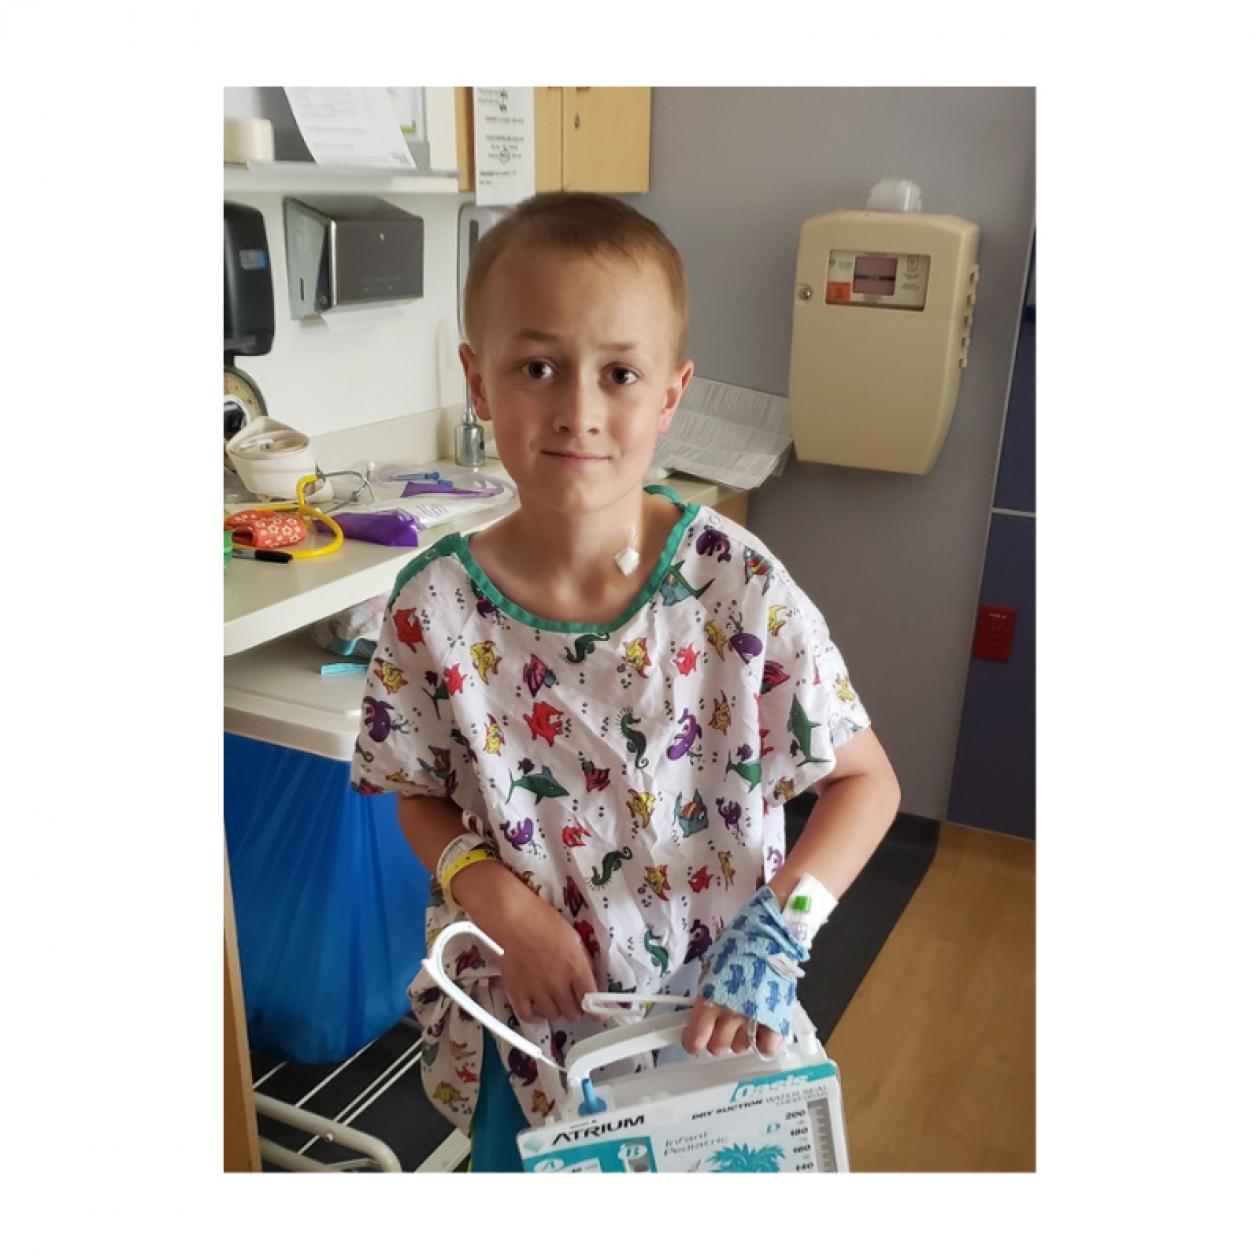 Cain, a 12-year-old patient with Ewing sarcoma, wearing a hospital gown and facing forward